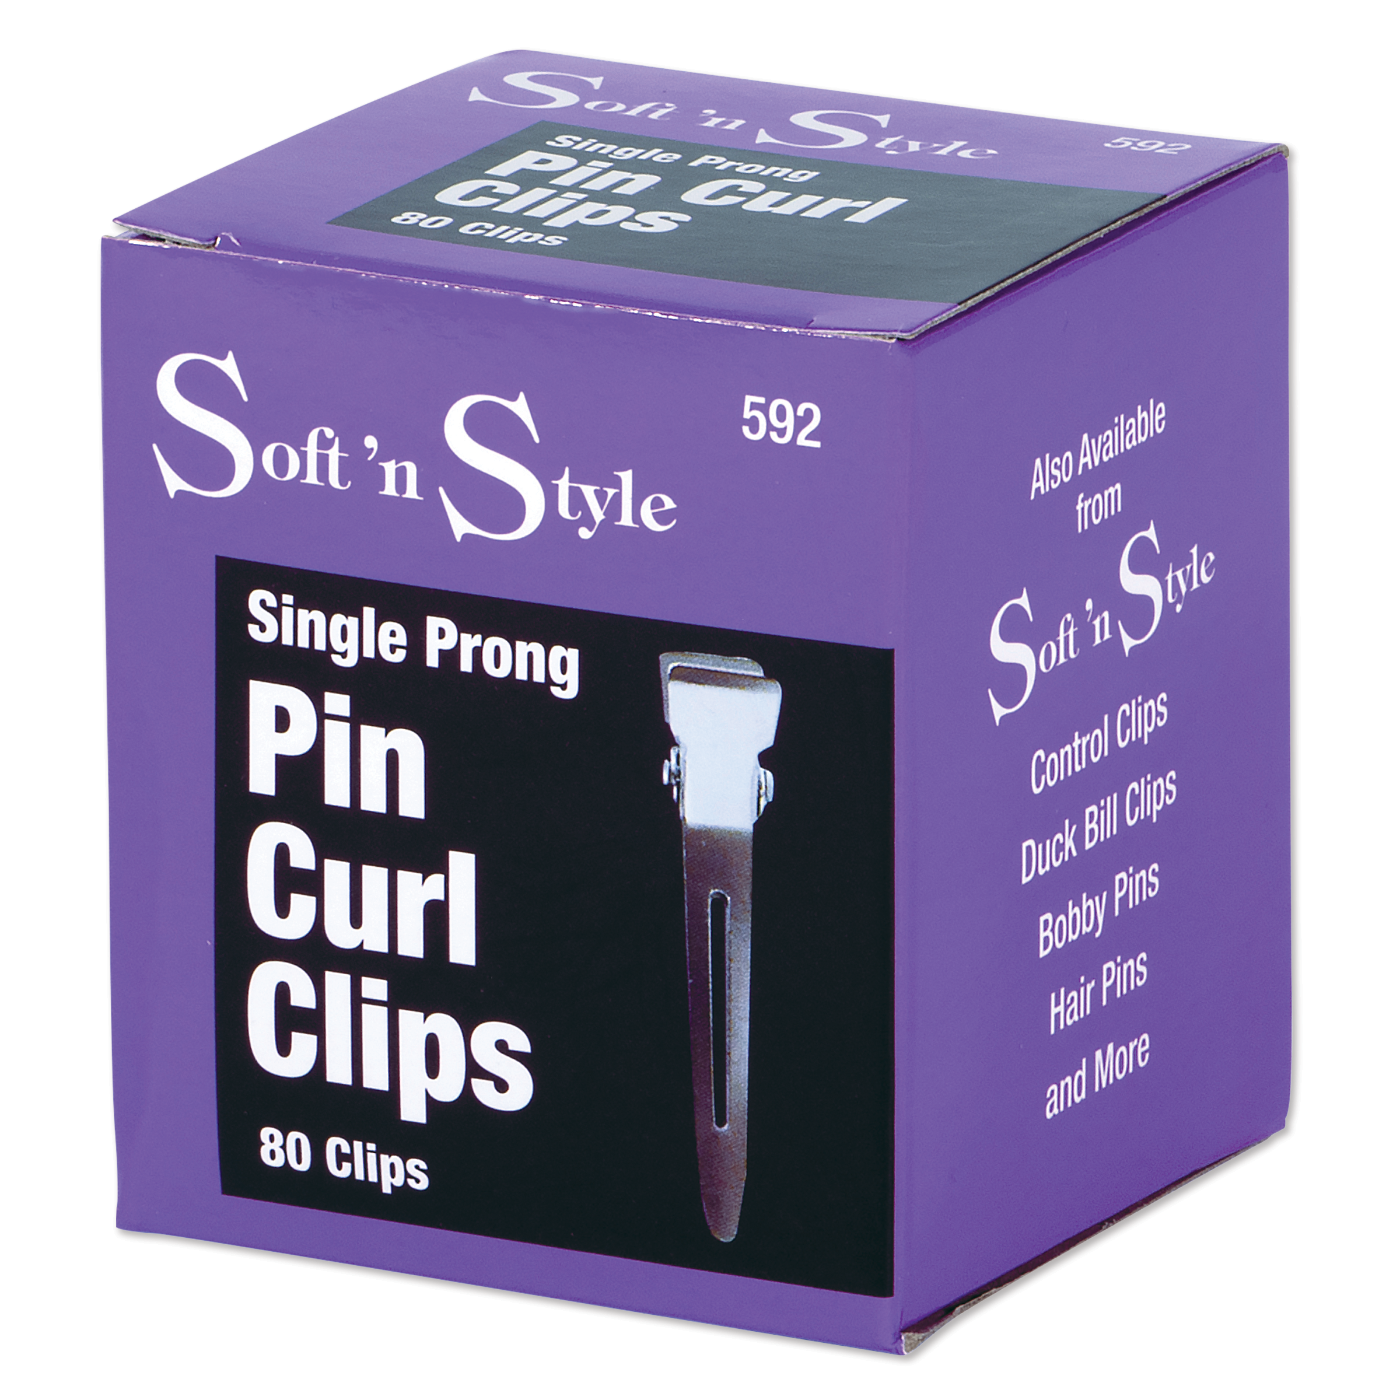 Single Prong Pin Curl Clips - box of 80